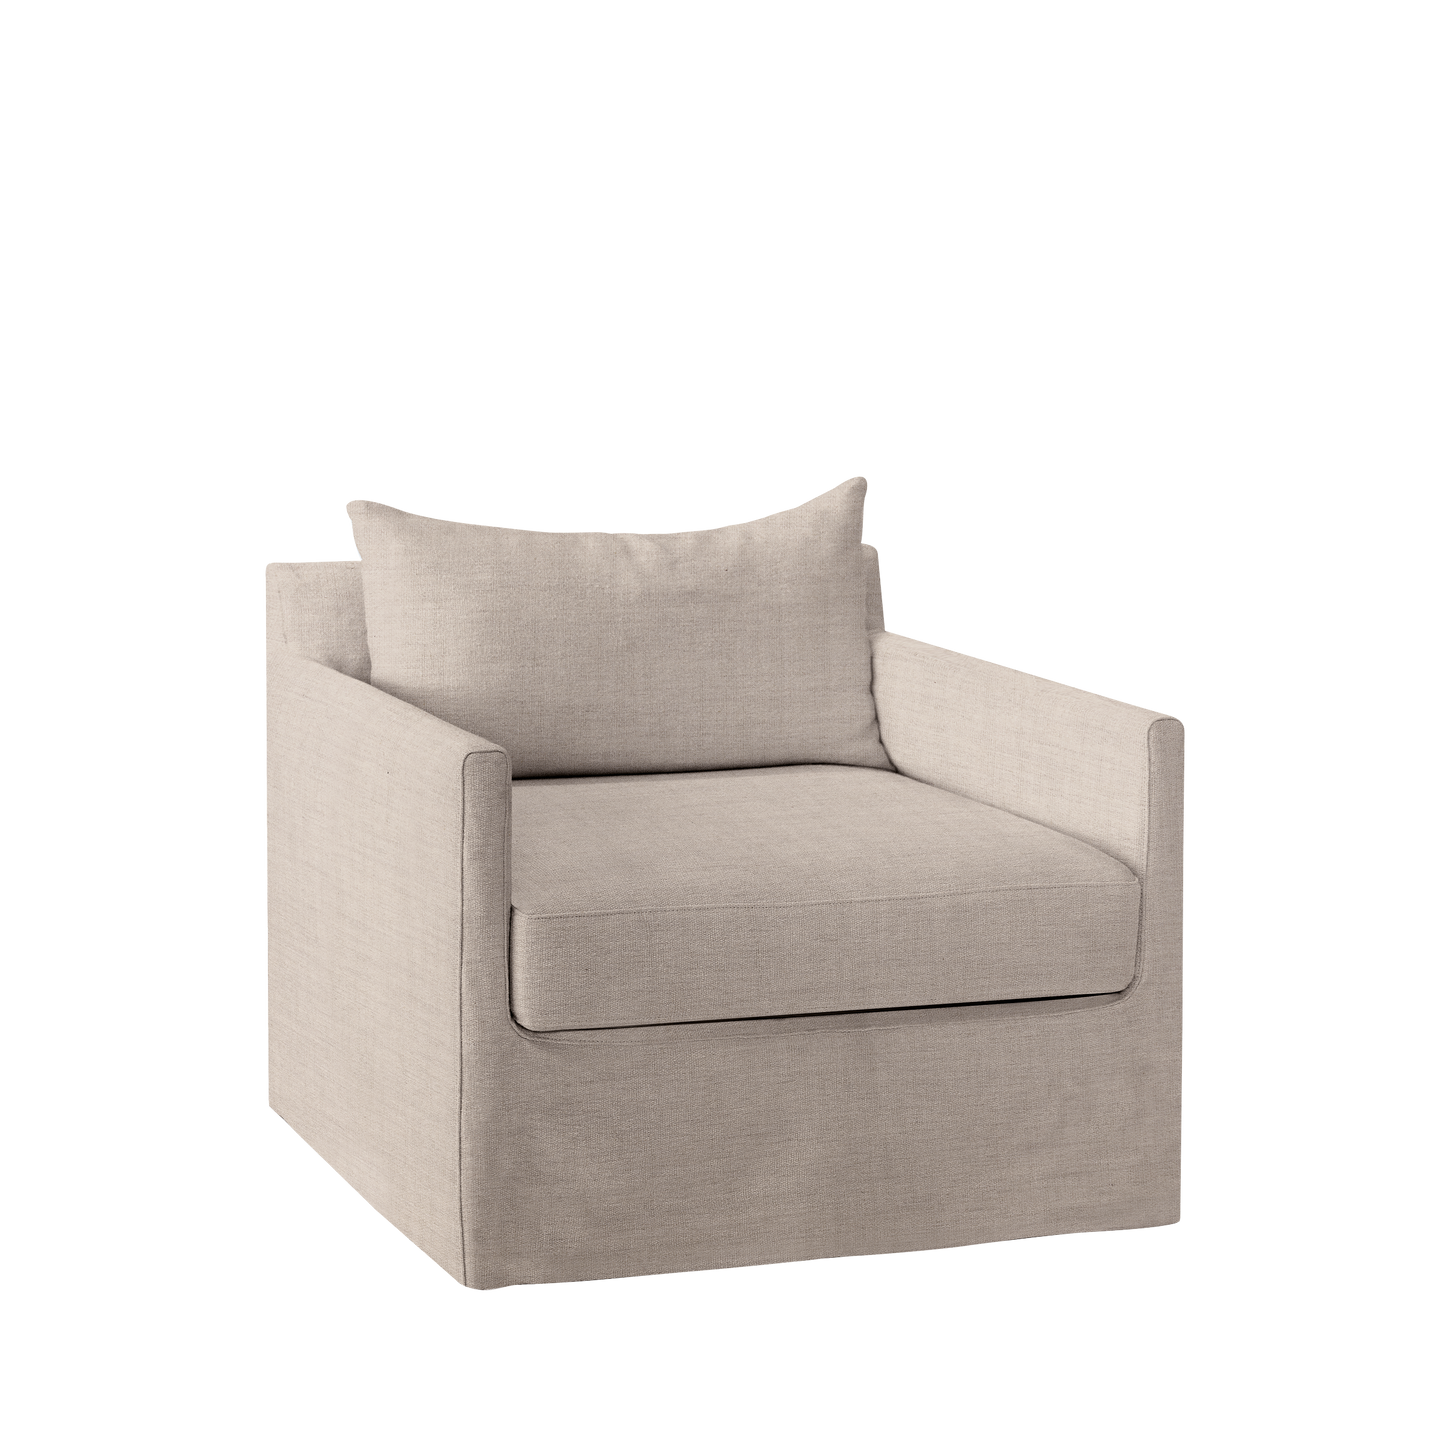 Extra wide Alba lounge chair with taupe textile